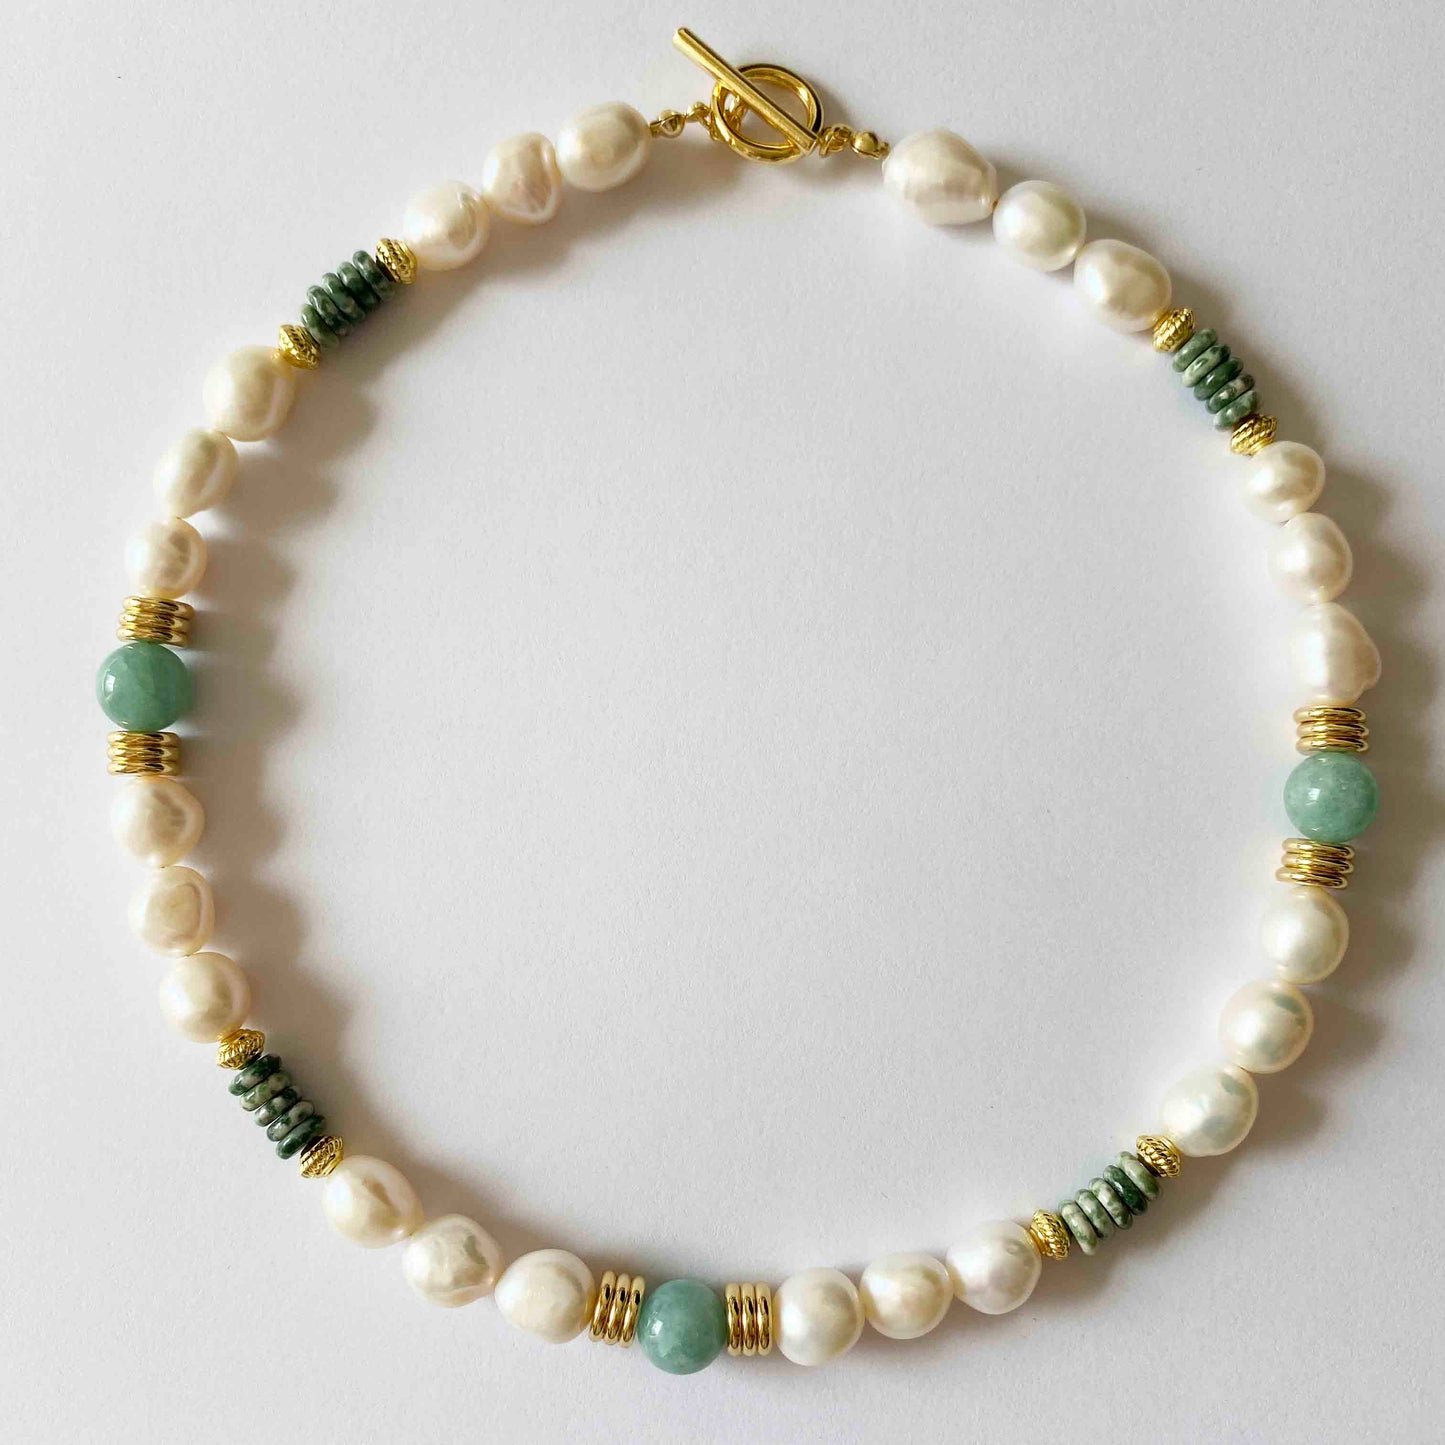 Jade necklace - China, necklace made of 49 finely polish… | Drouot.com